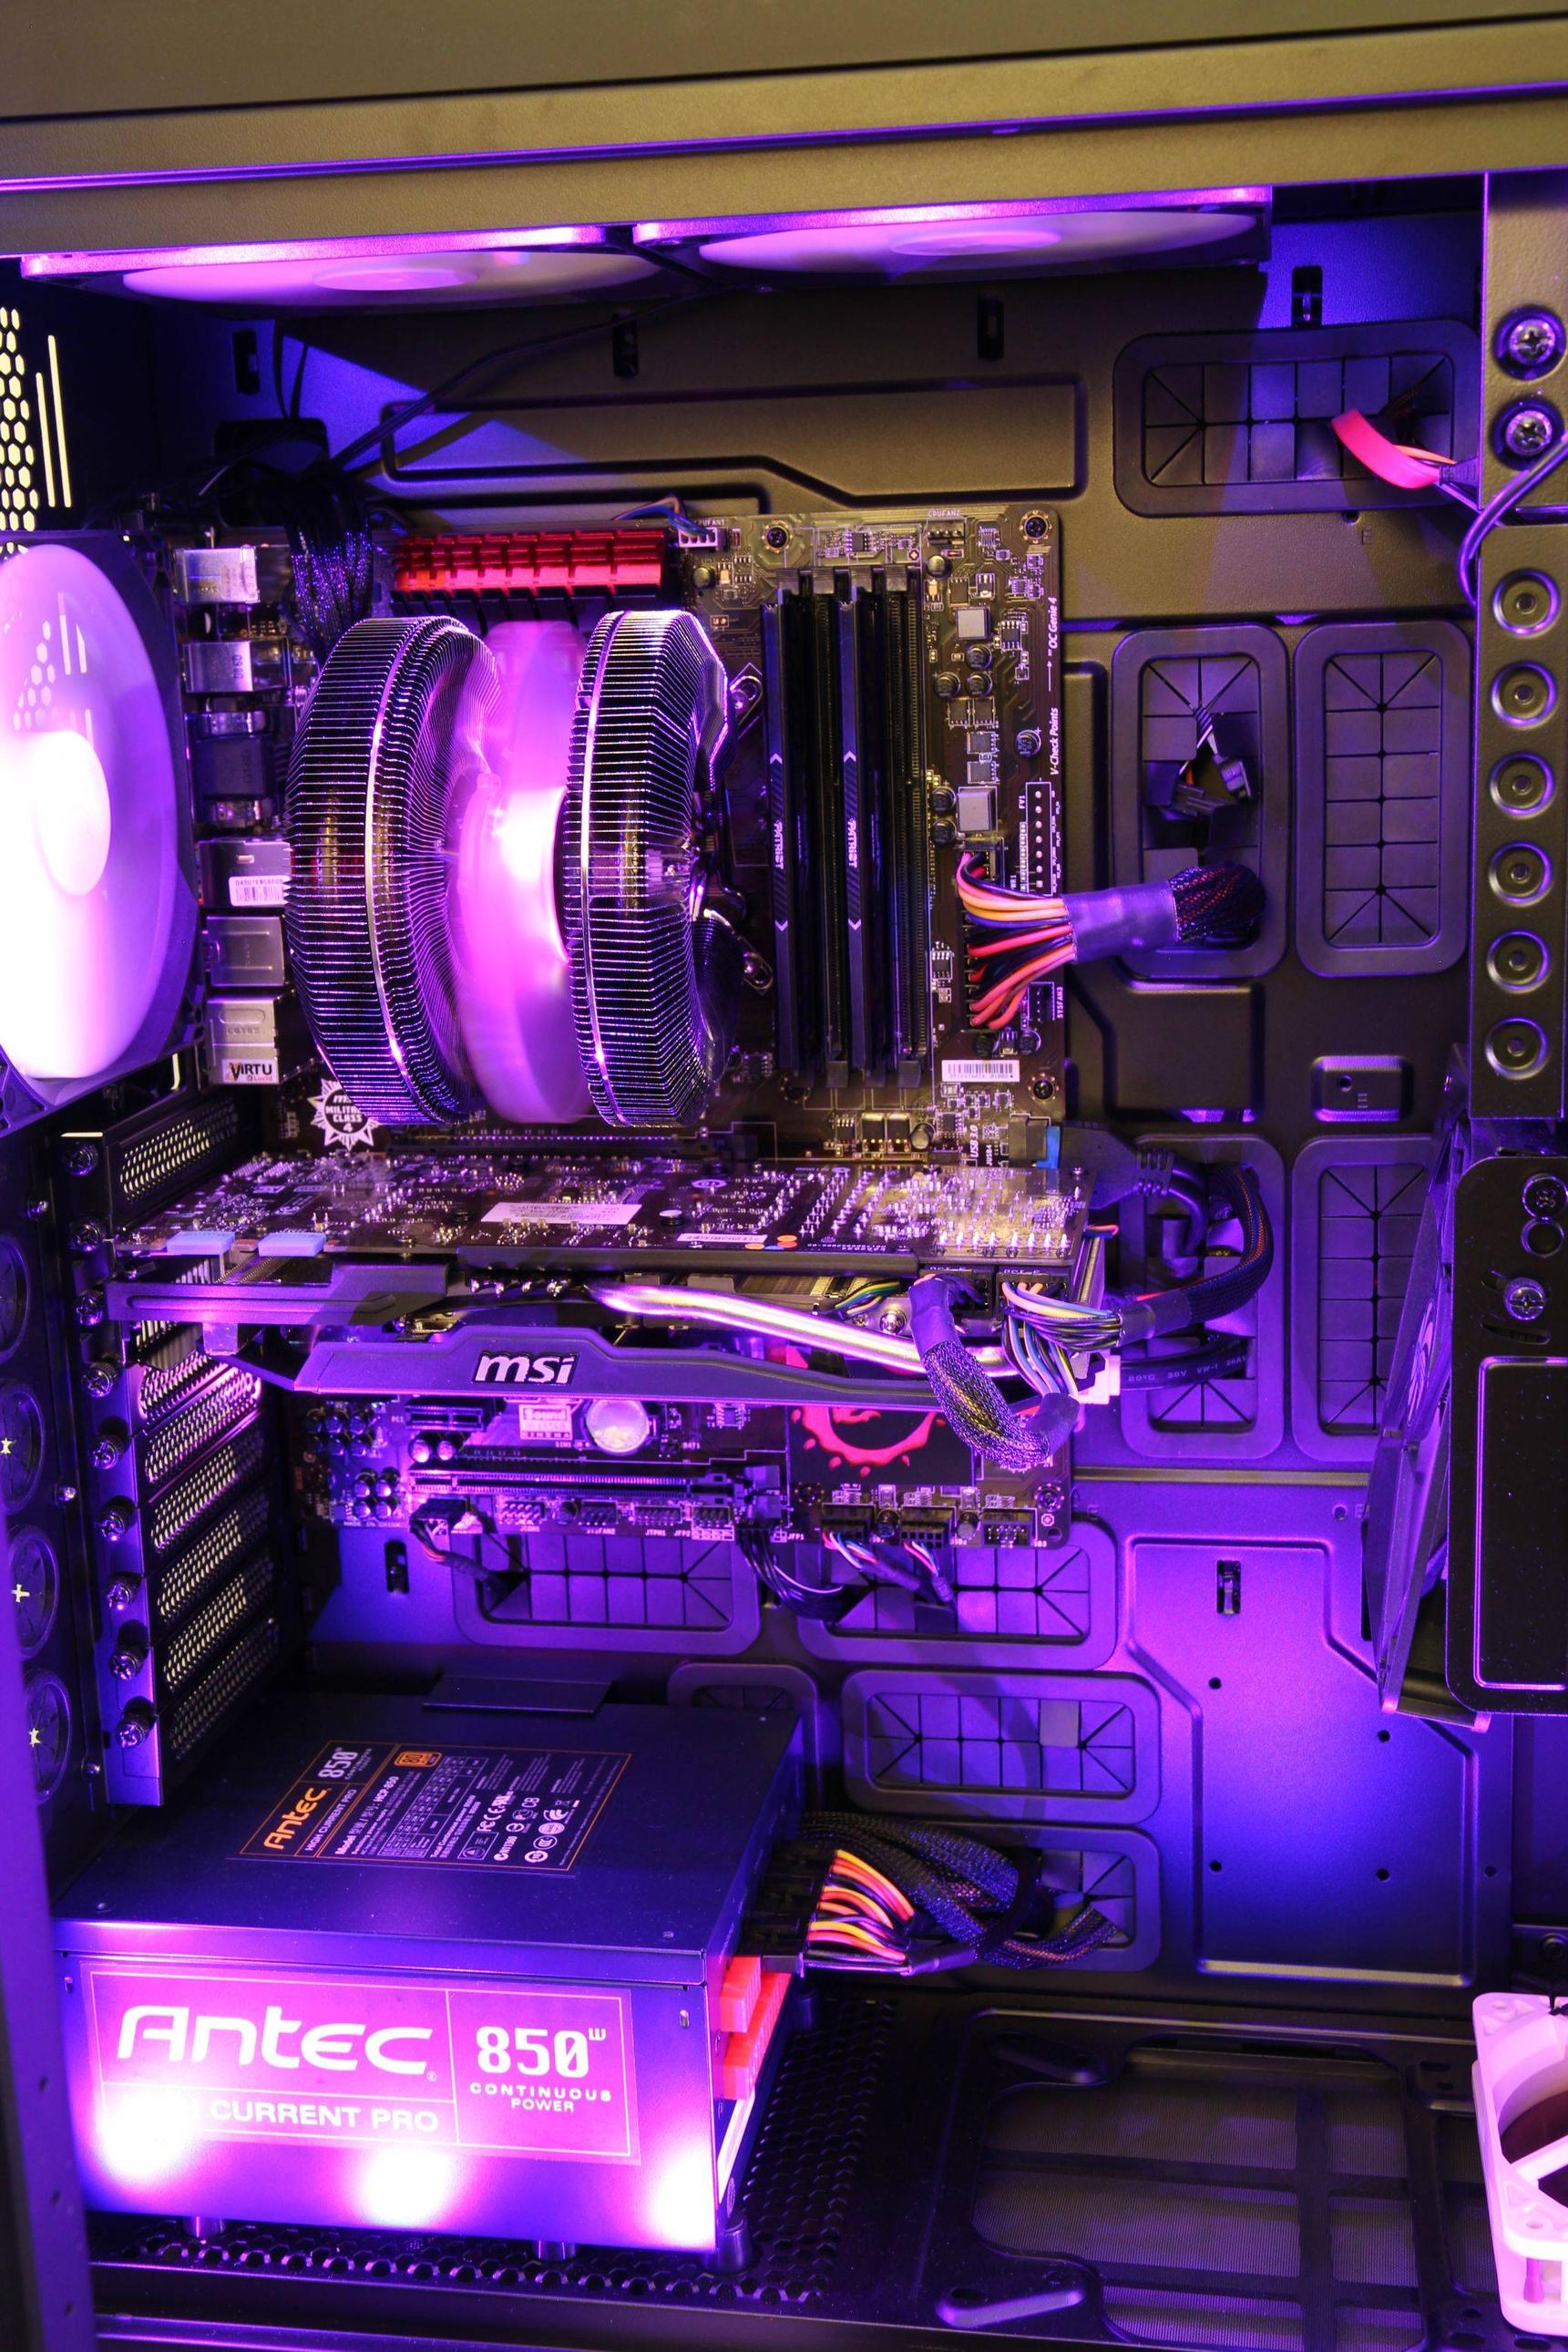 Simple How To Make Your Gaming Pc Look Better with RGB